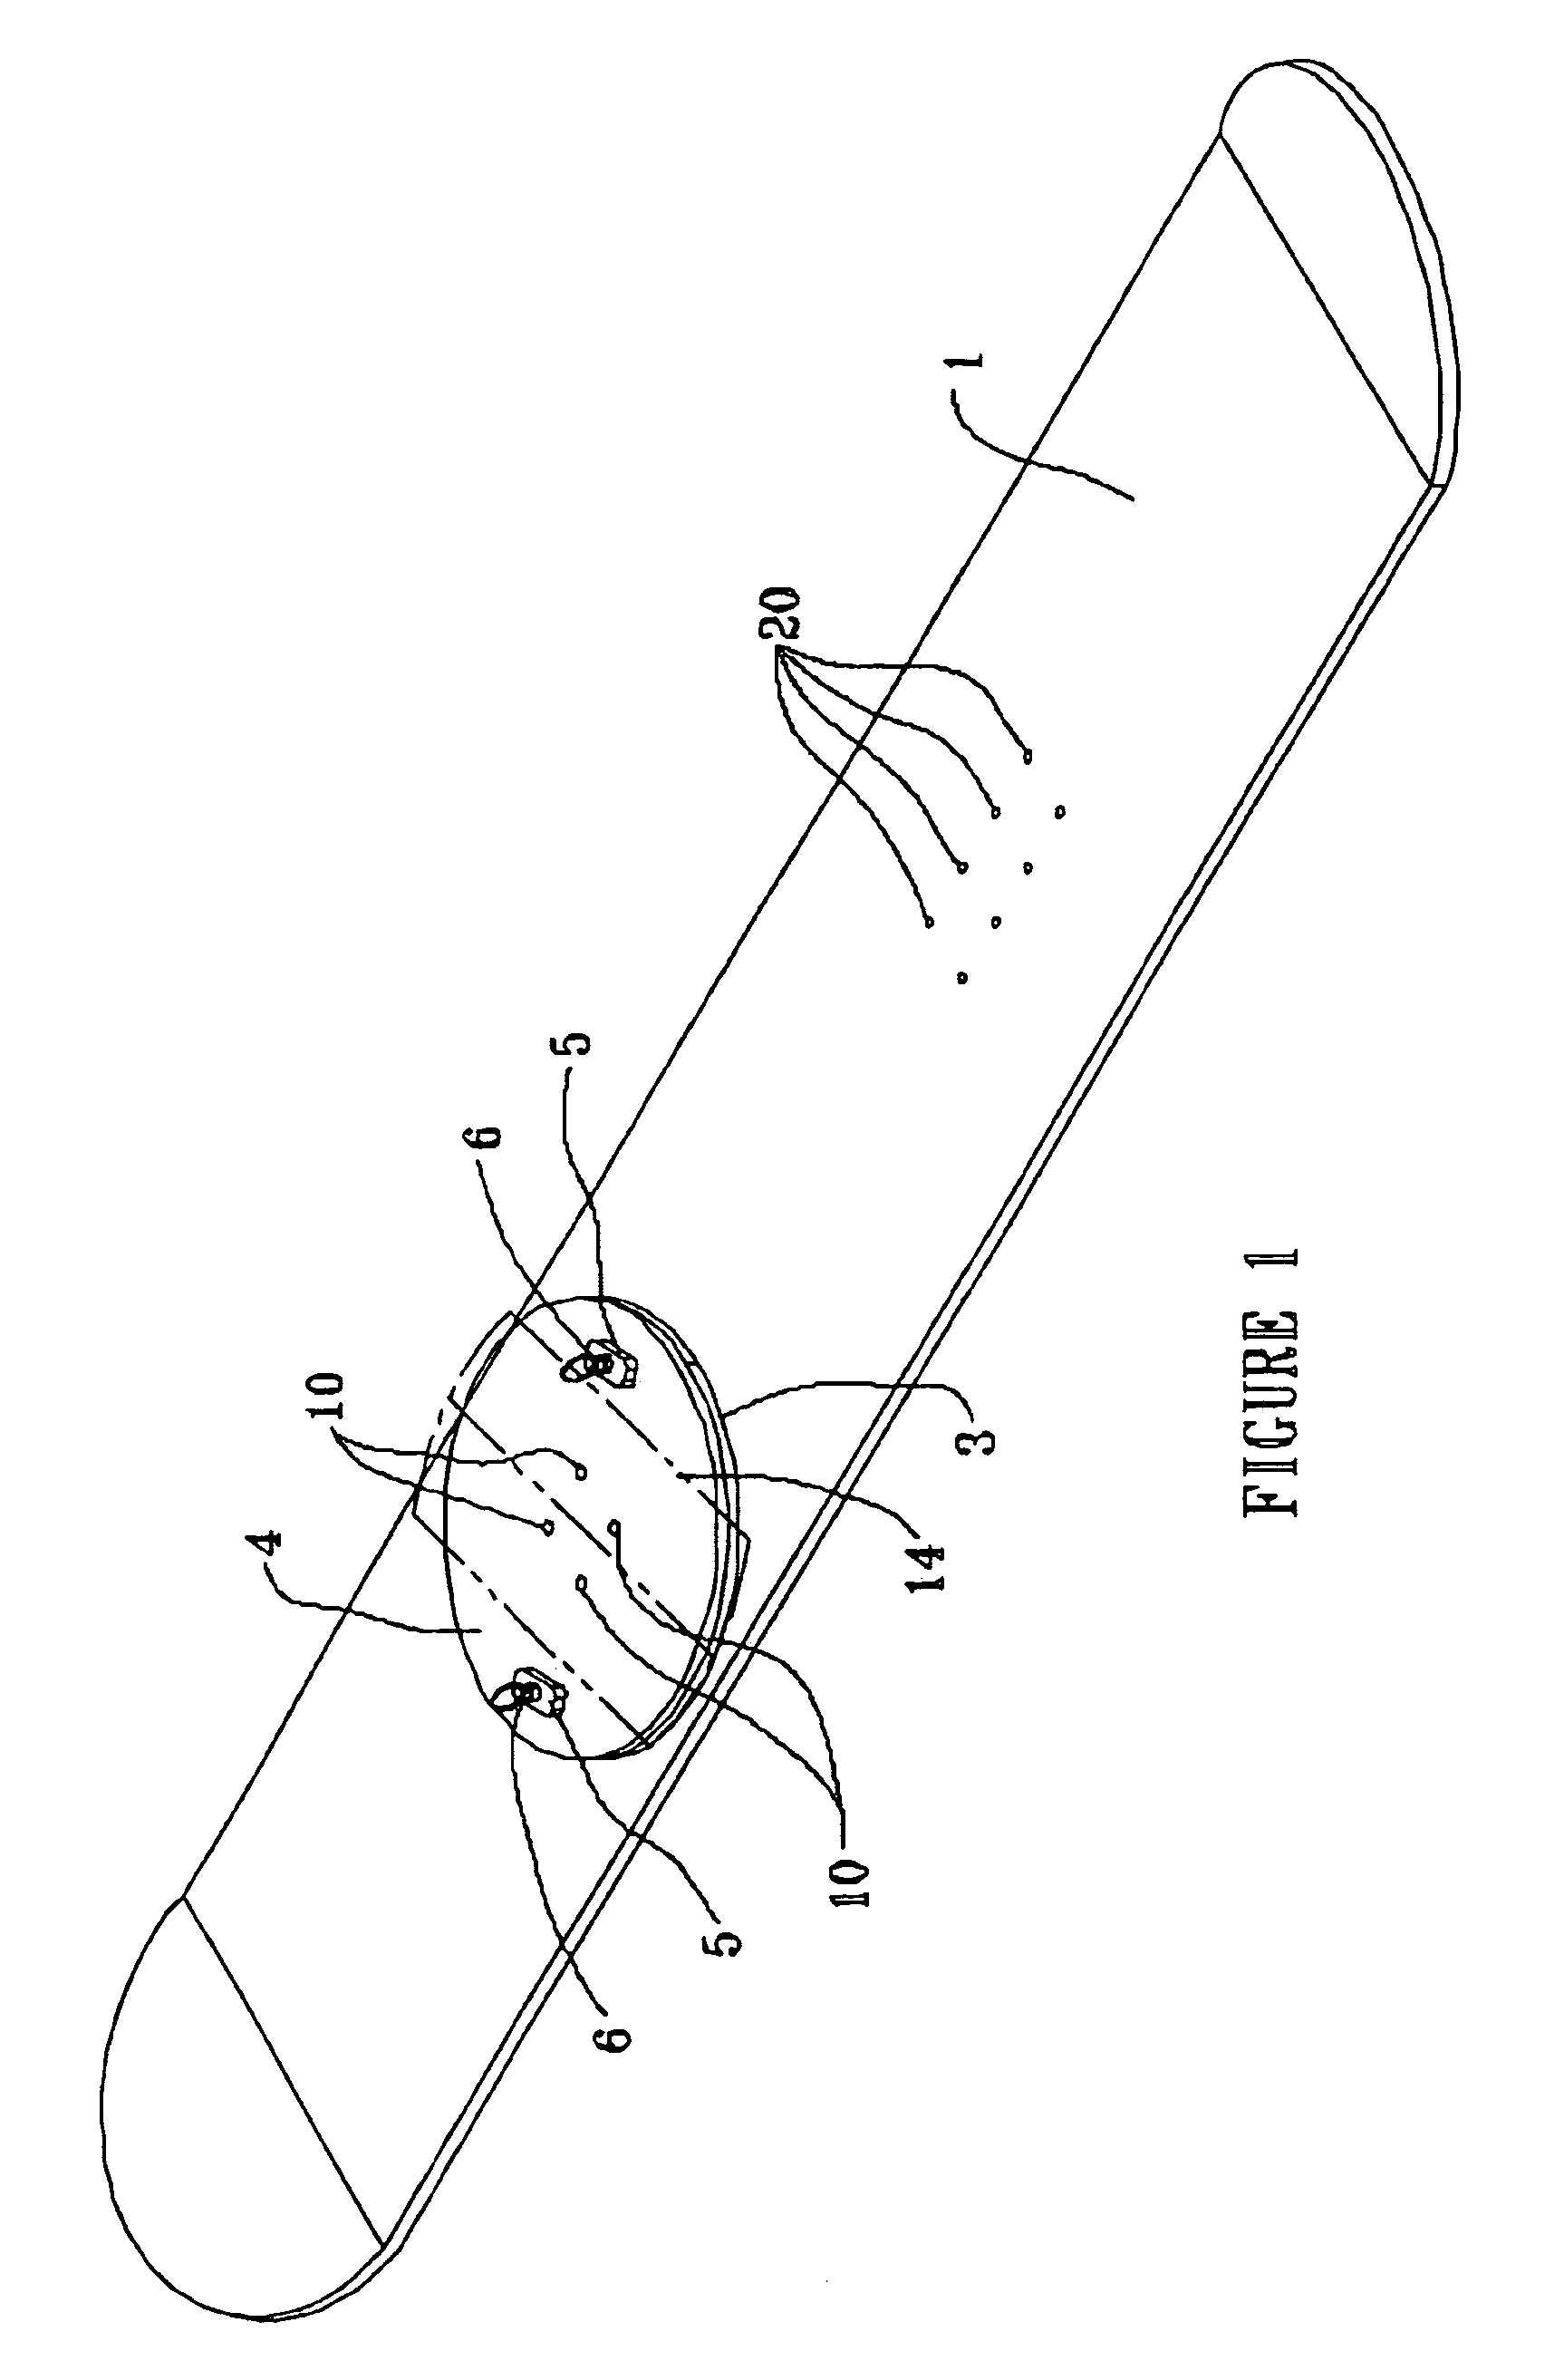 Rotatable binding apparatus for a snowboard